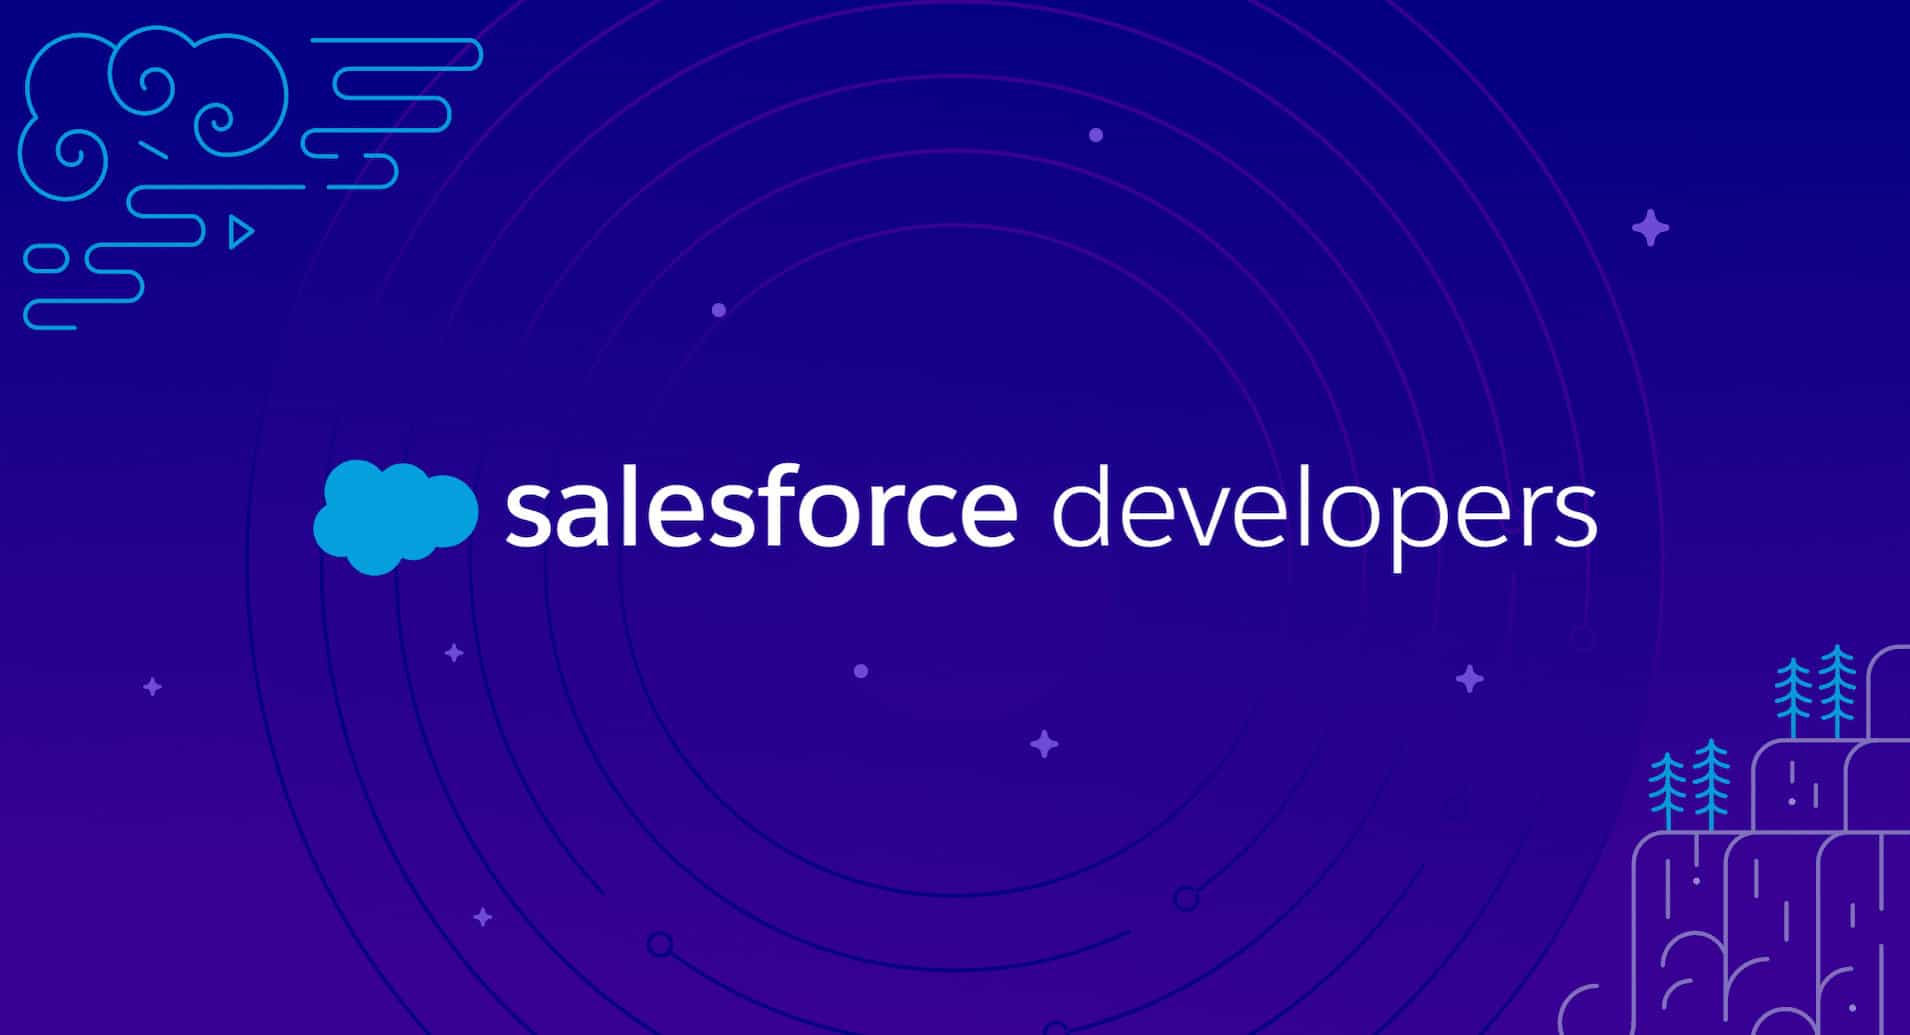 Salesforce Developer Jobs in the United States of America